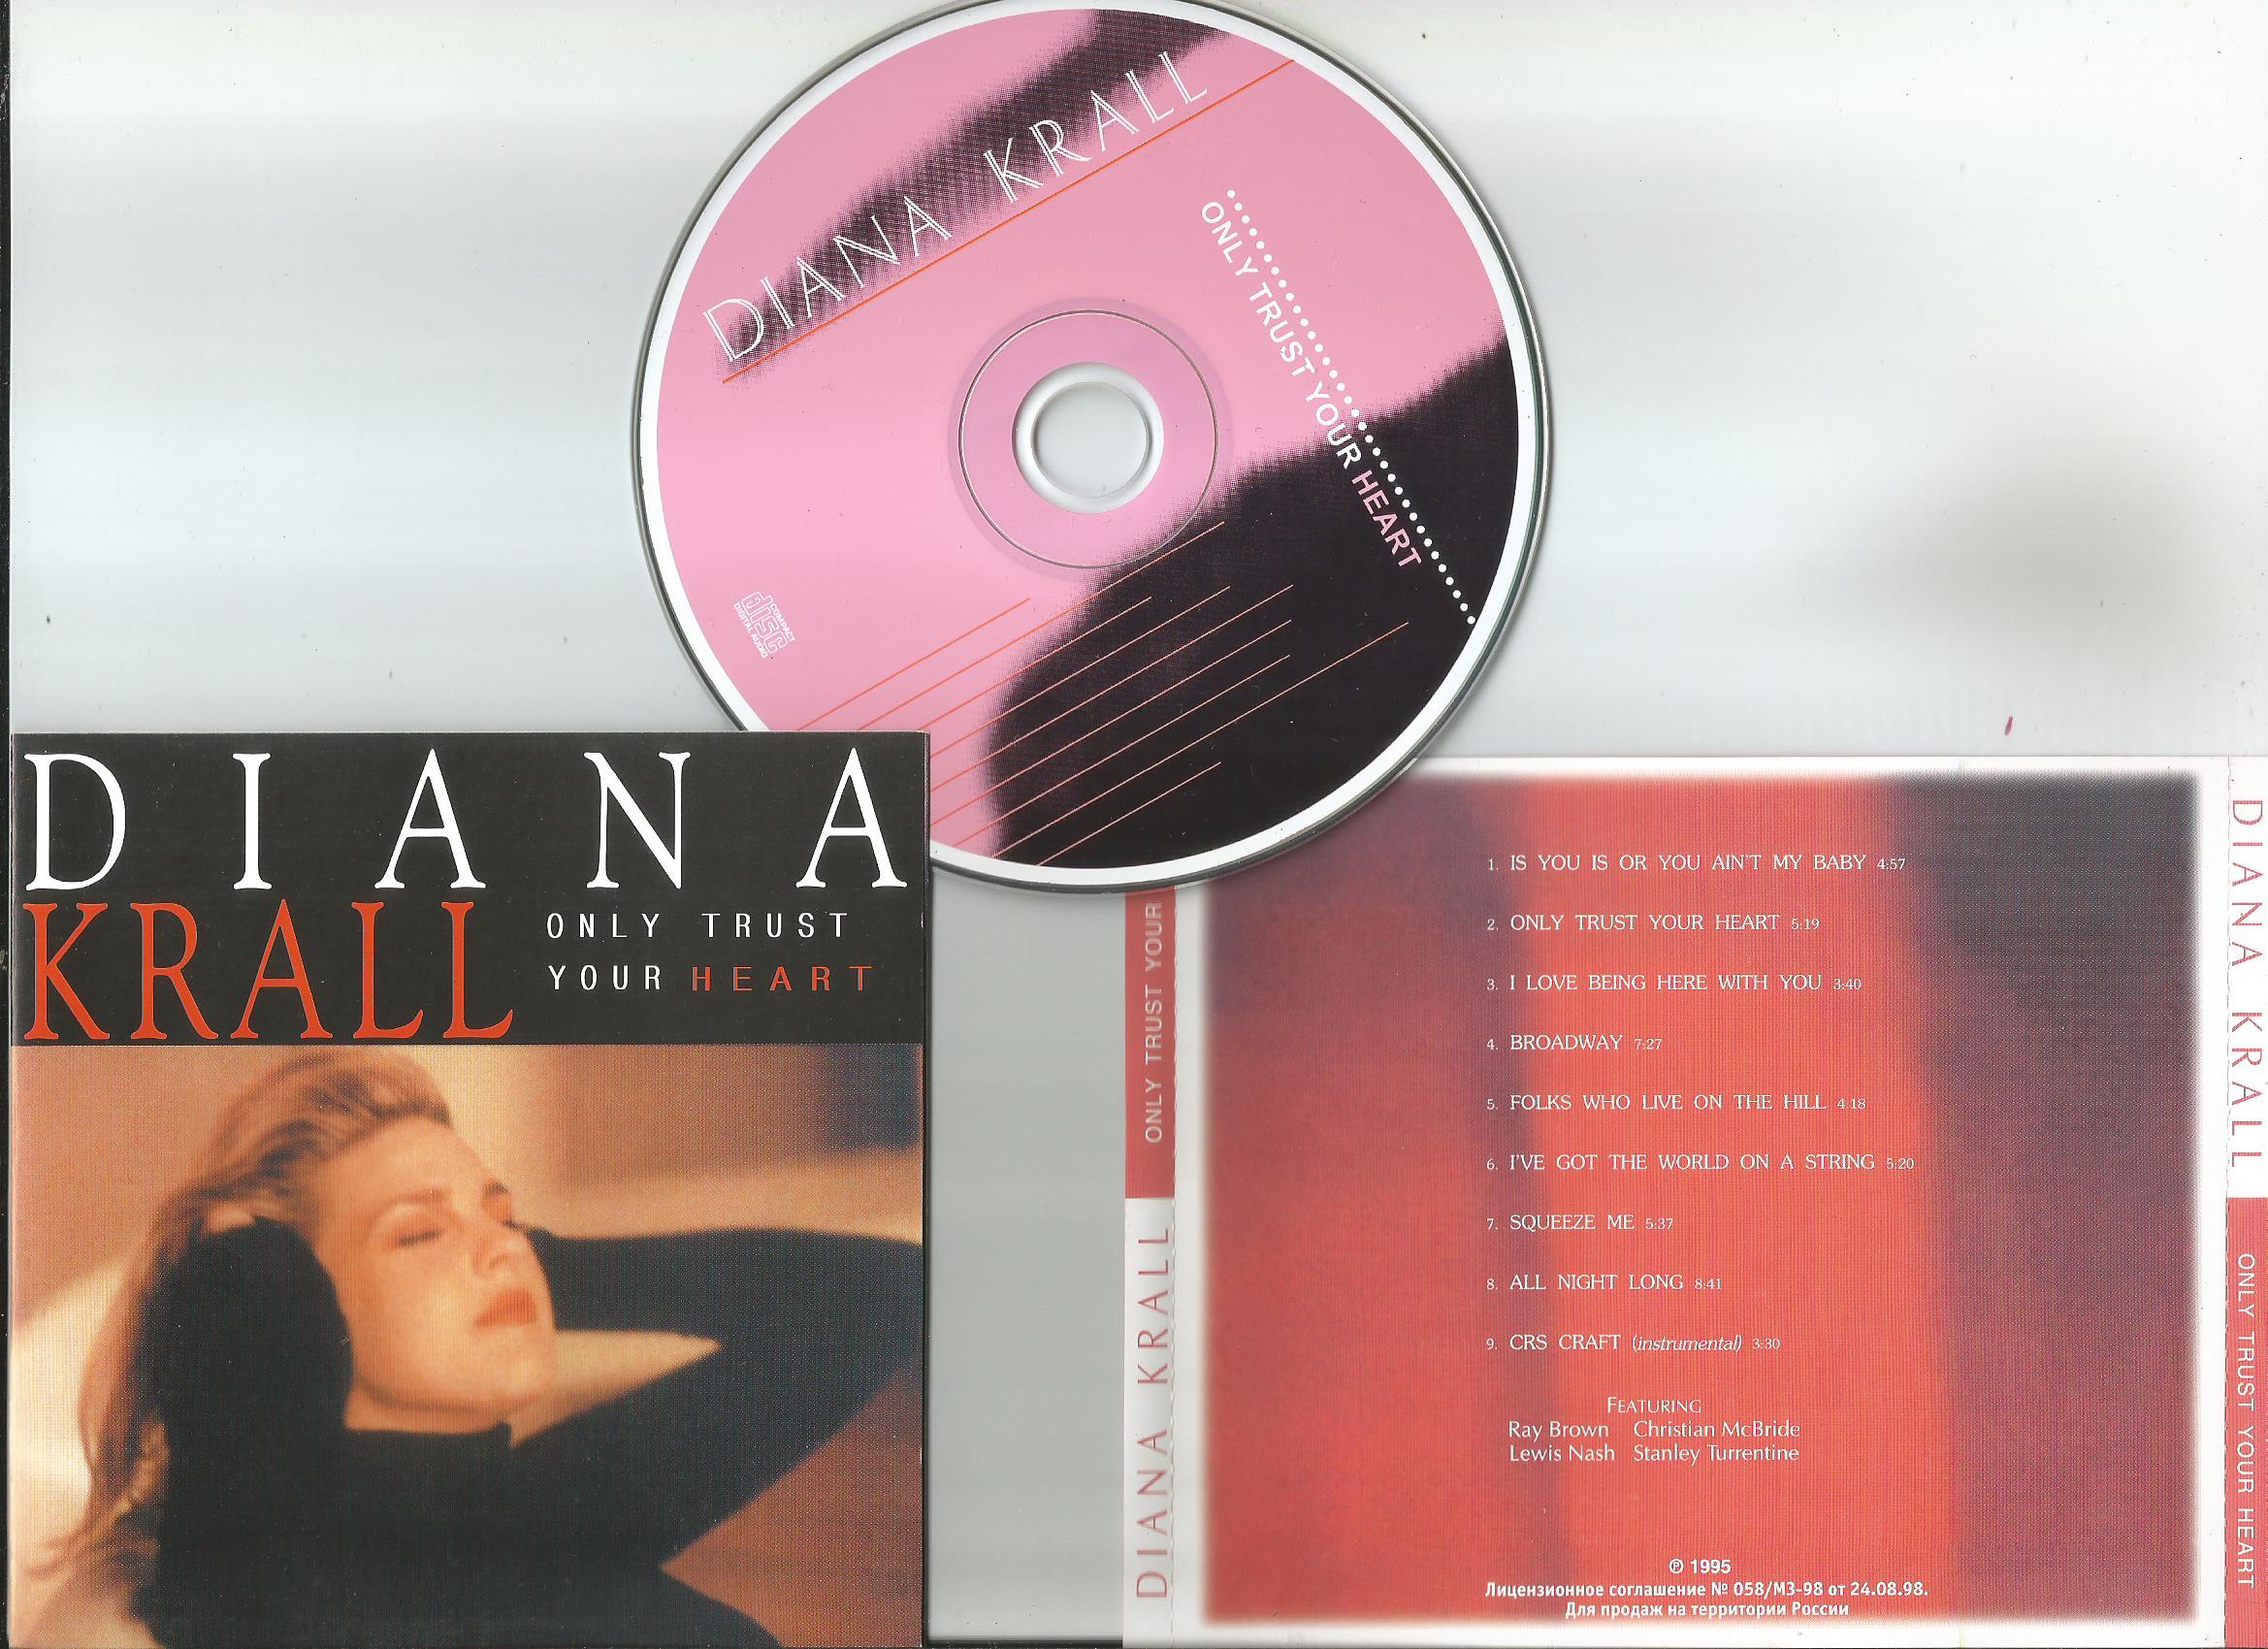 Only trust. Diana Krall - only Trust your Heart. Двд аудио диск Diana Krall. CD диск Diana Ross на 2-ч дисках.